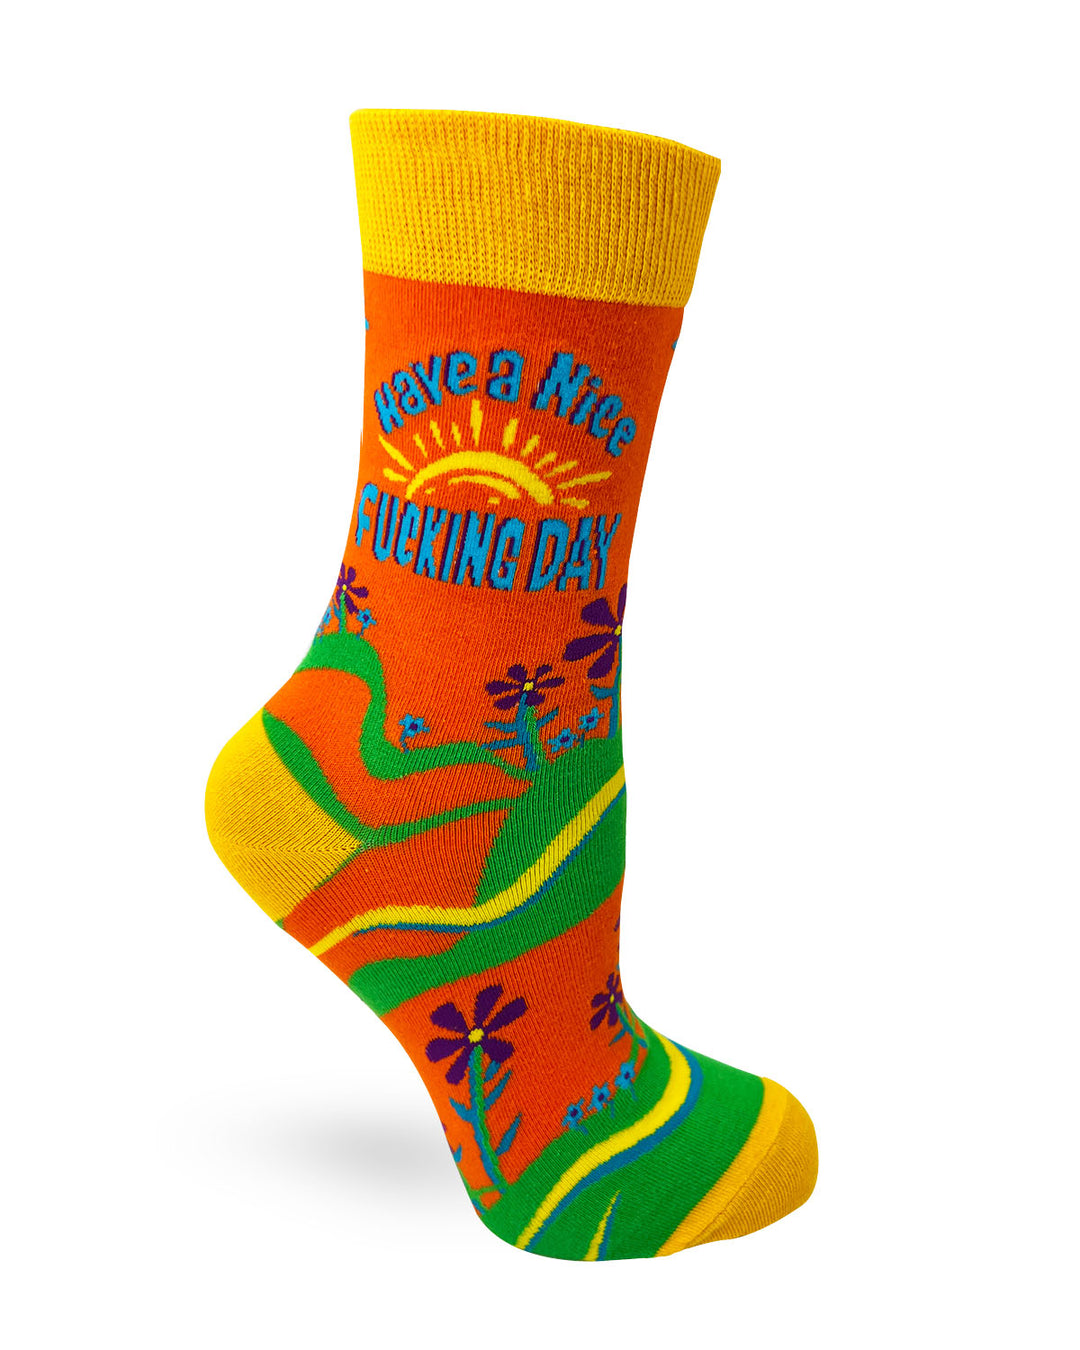 Have a Nice Fucking Day Orange, green and yellow women's Crew Socks